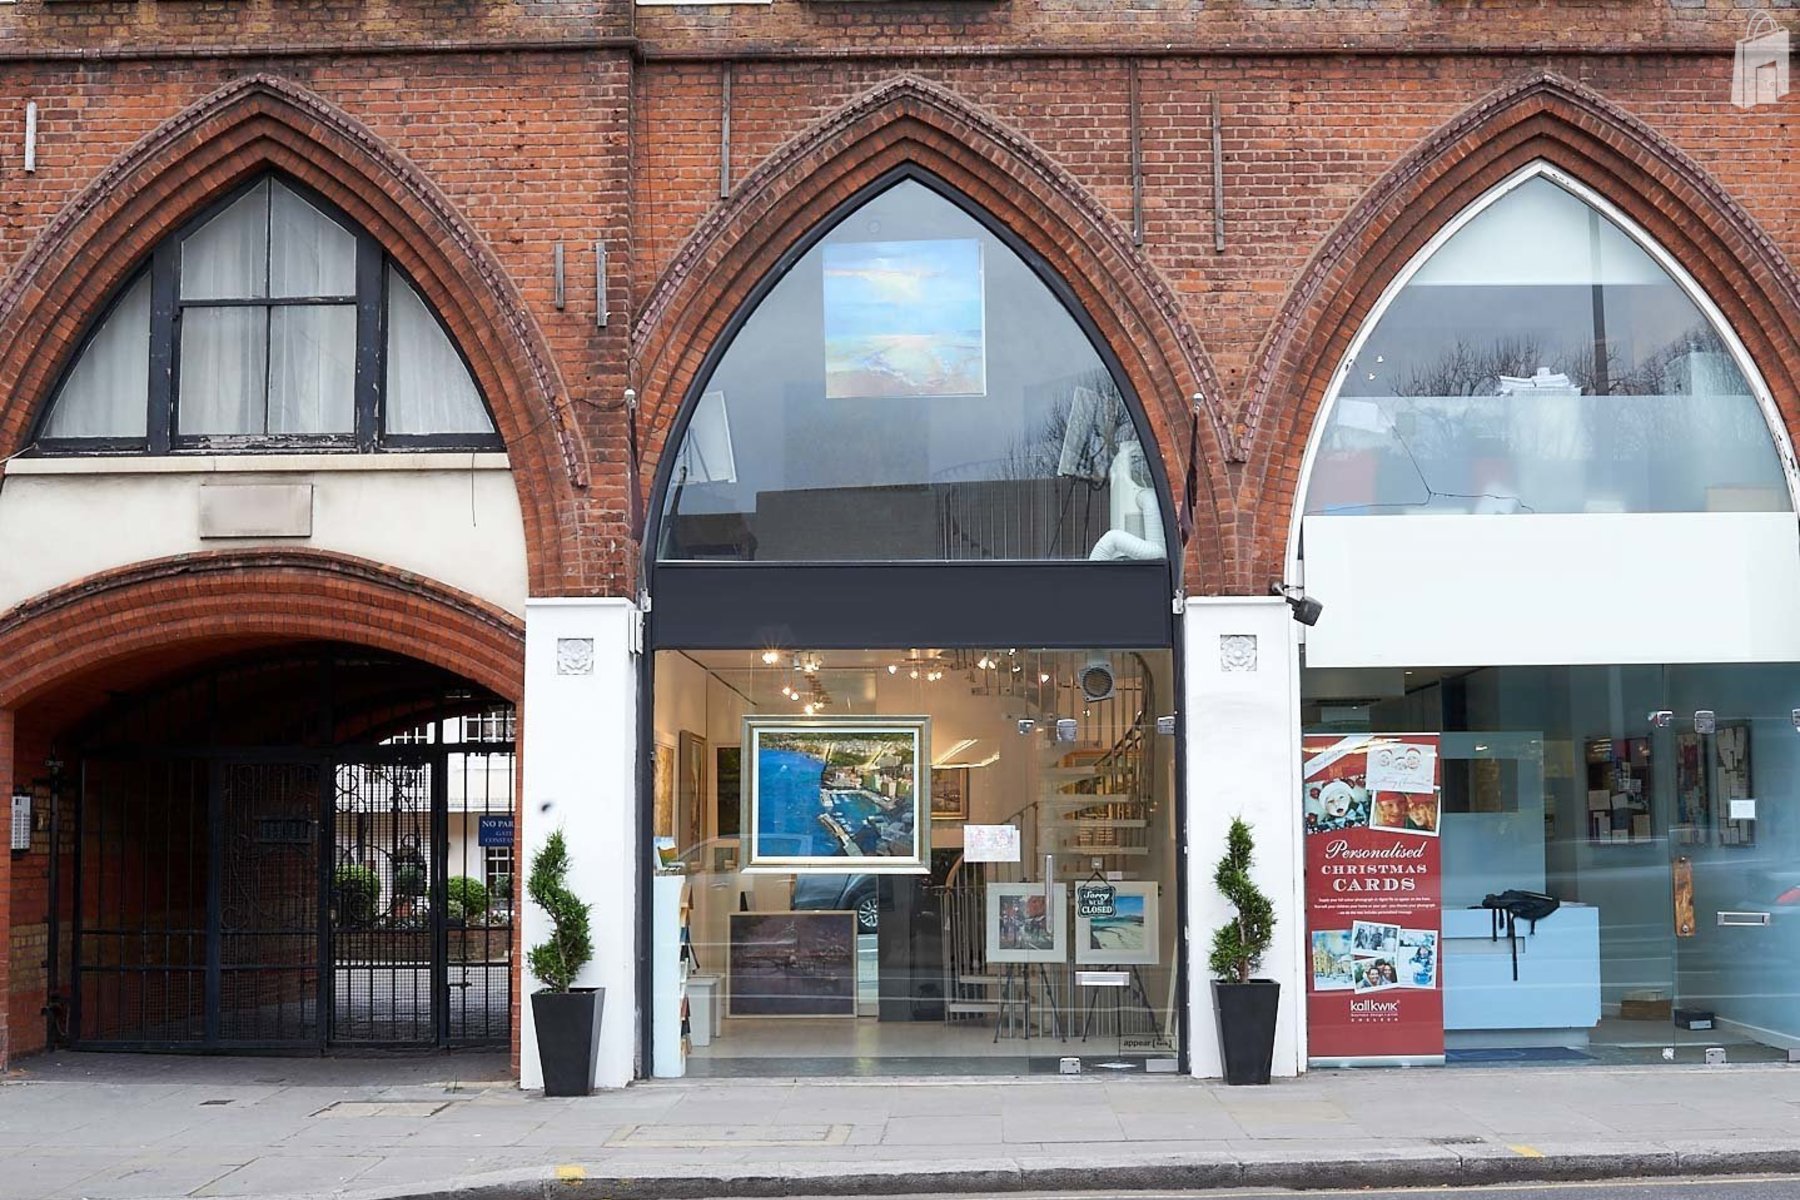 Pop-Up Gallery on the King's Road